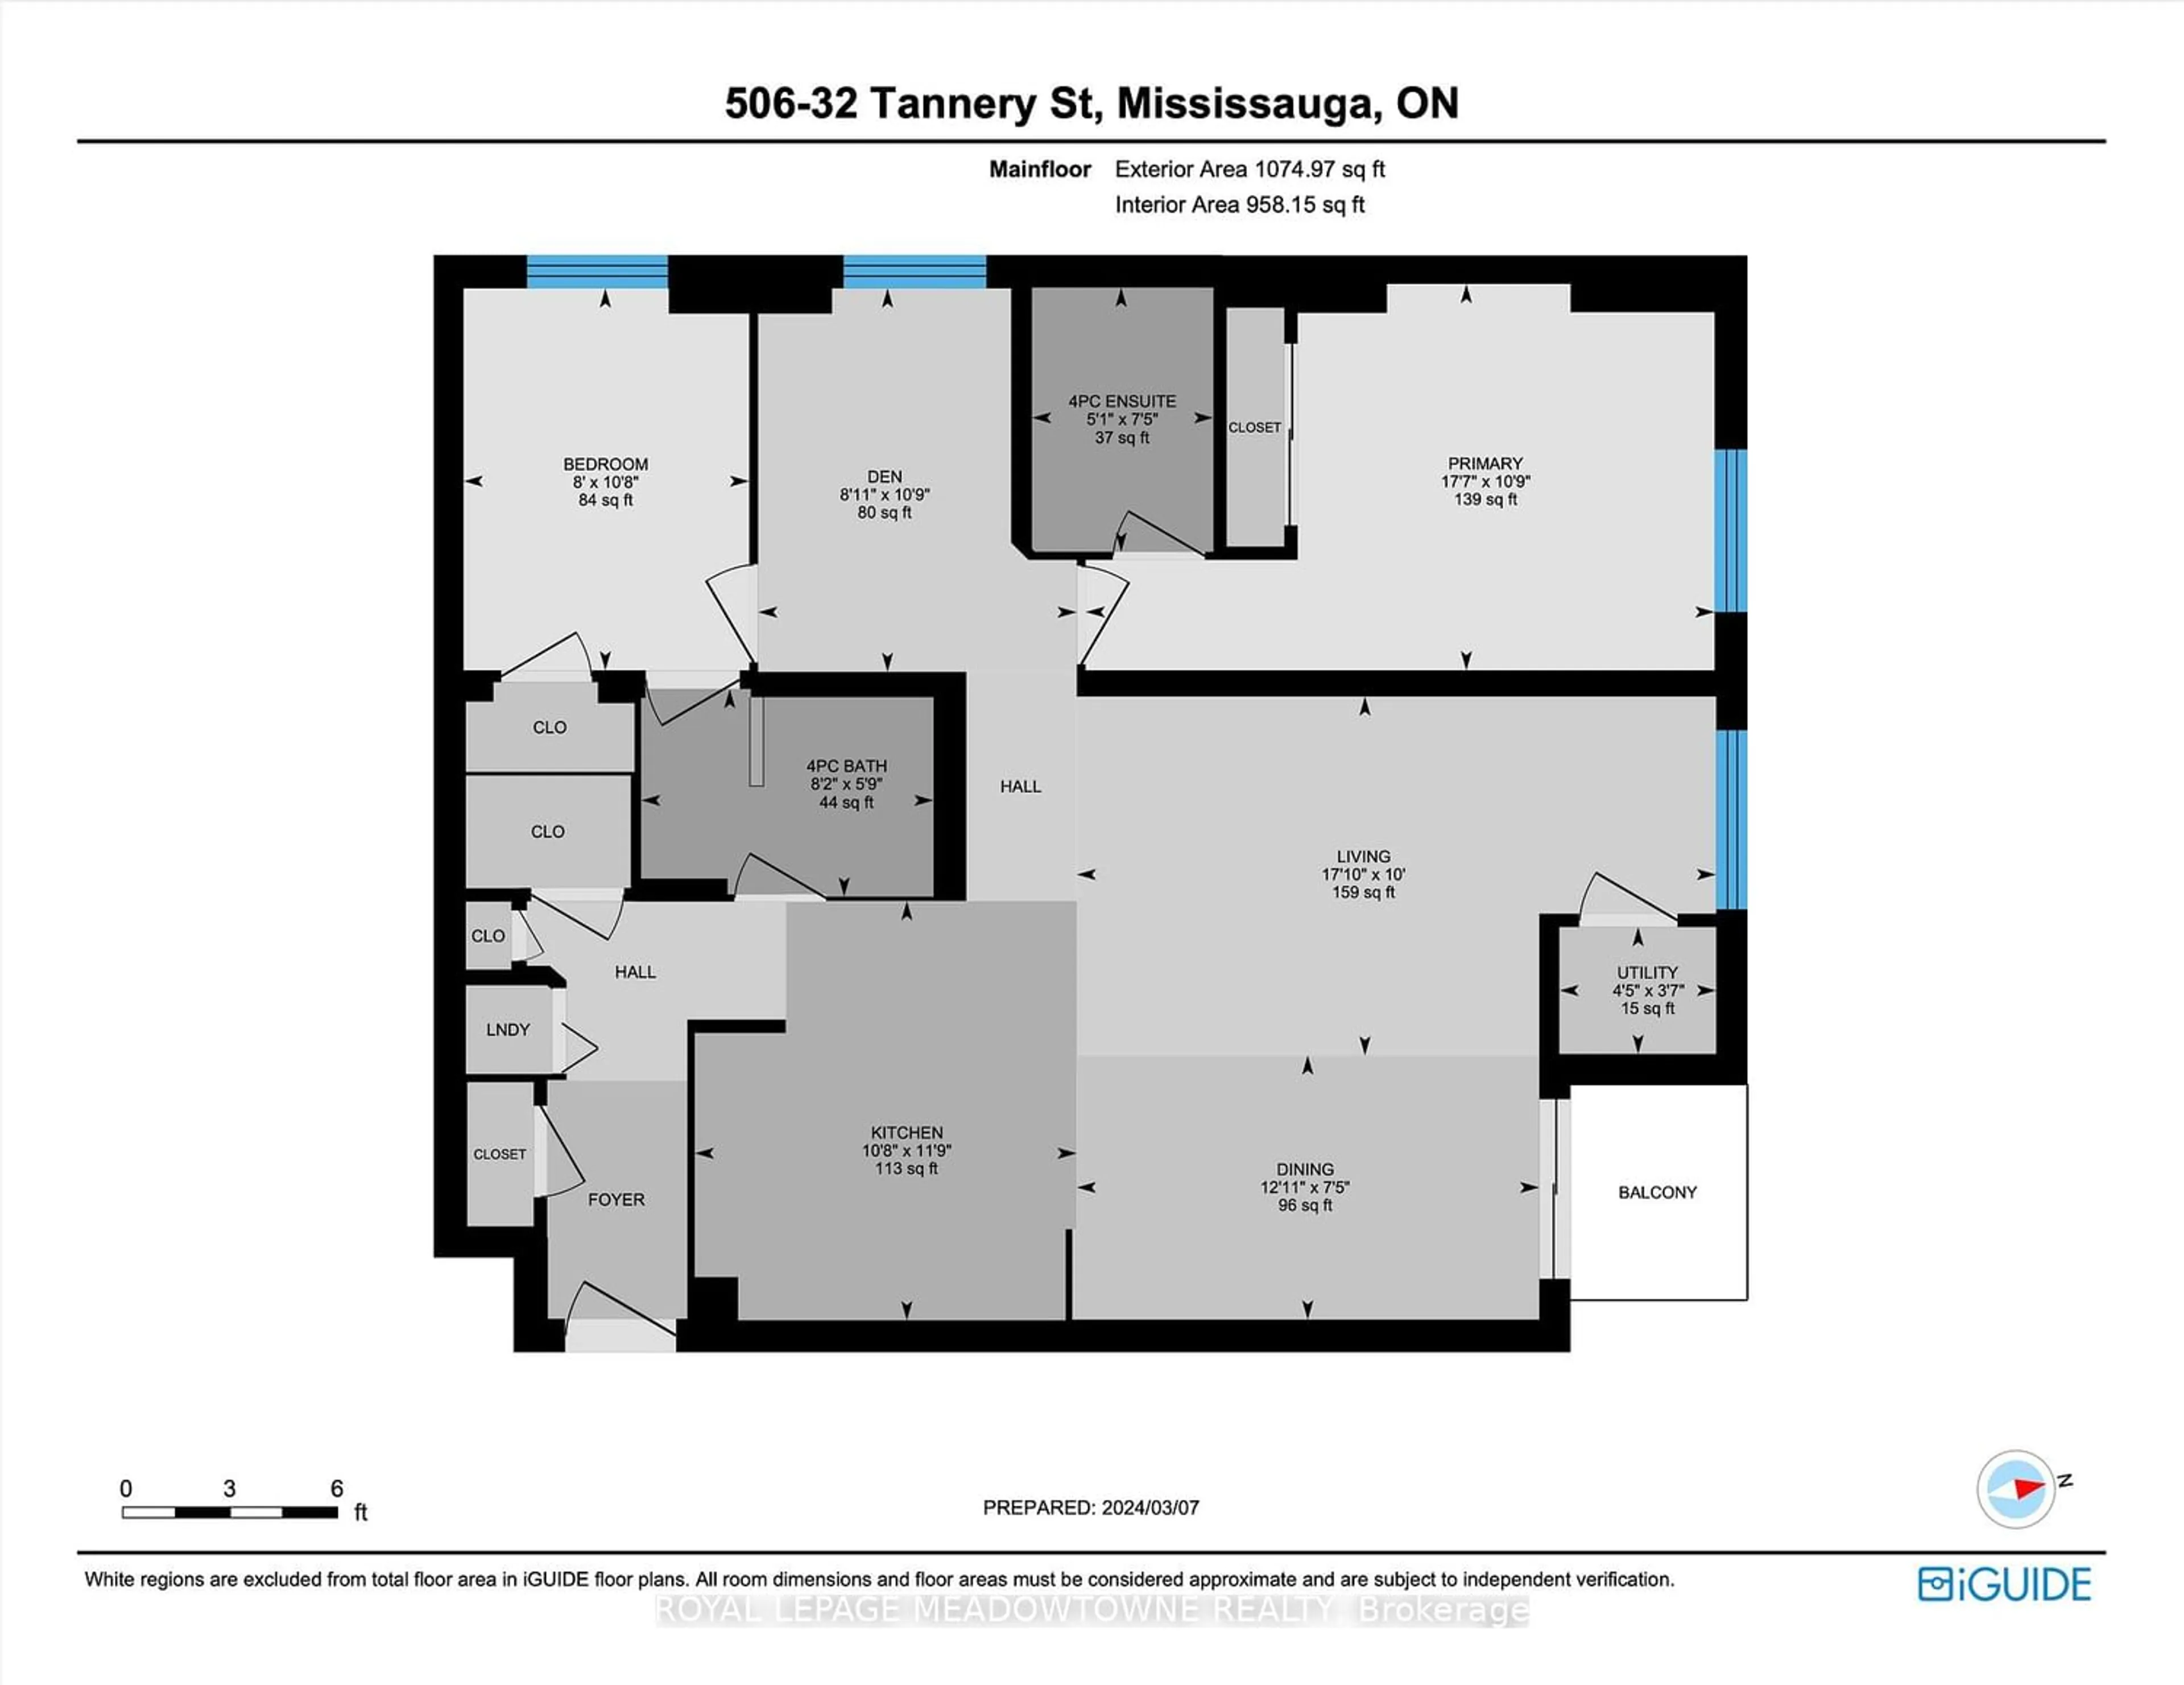 Floor plan for 32 Tannery St #506, Mississauga Ontario L5M 6T6